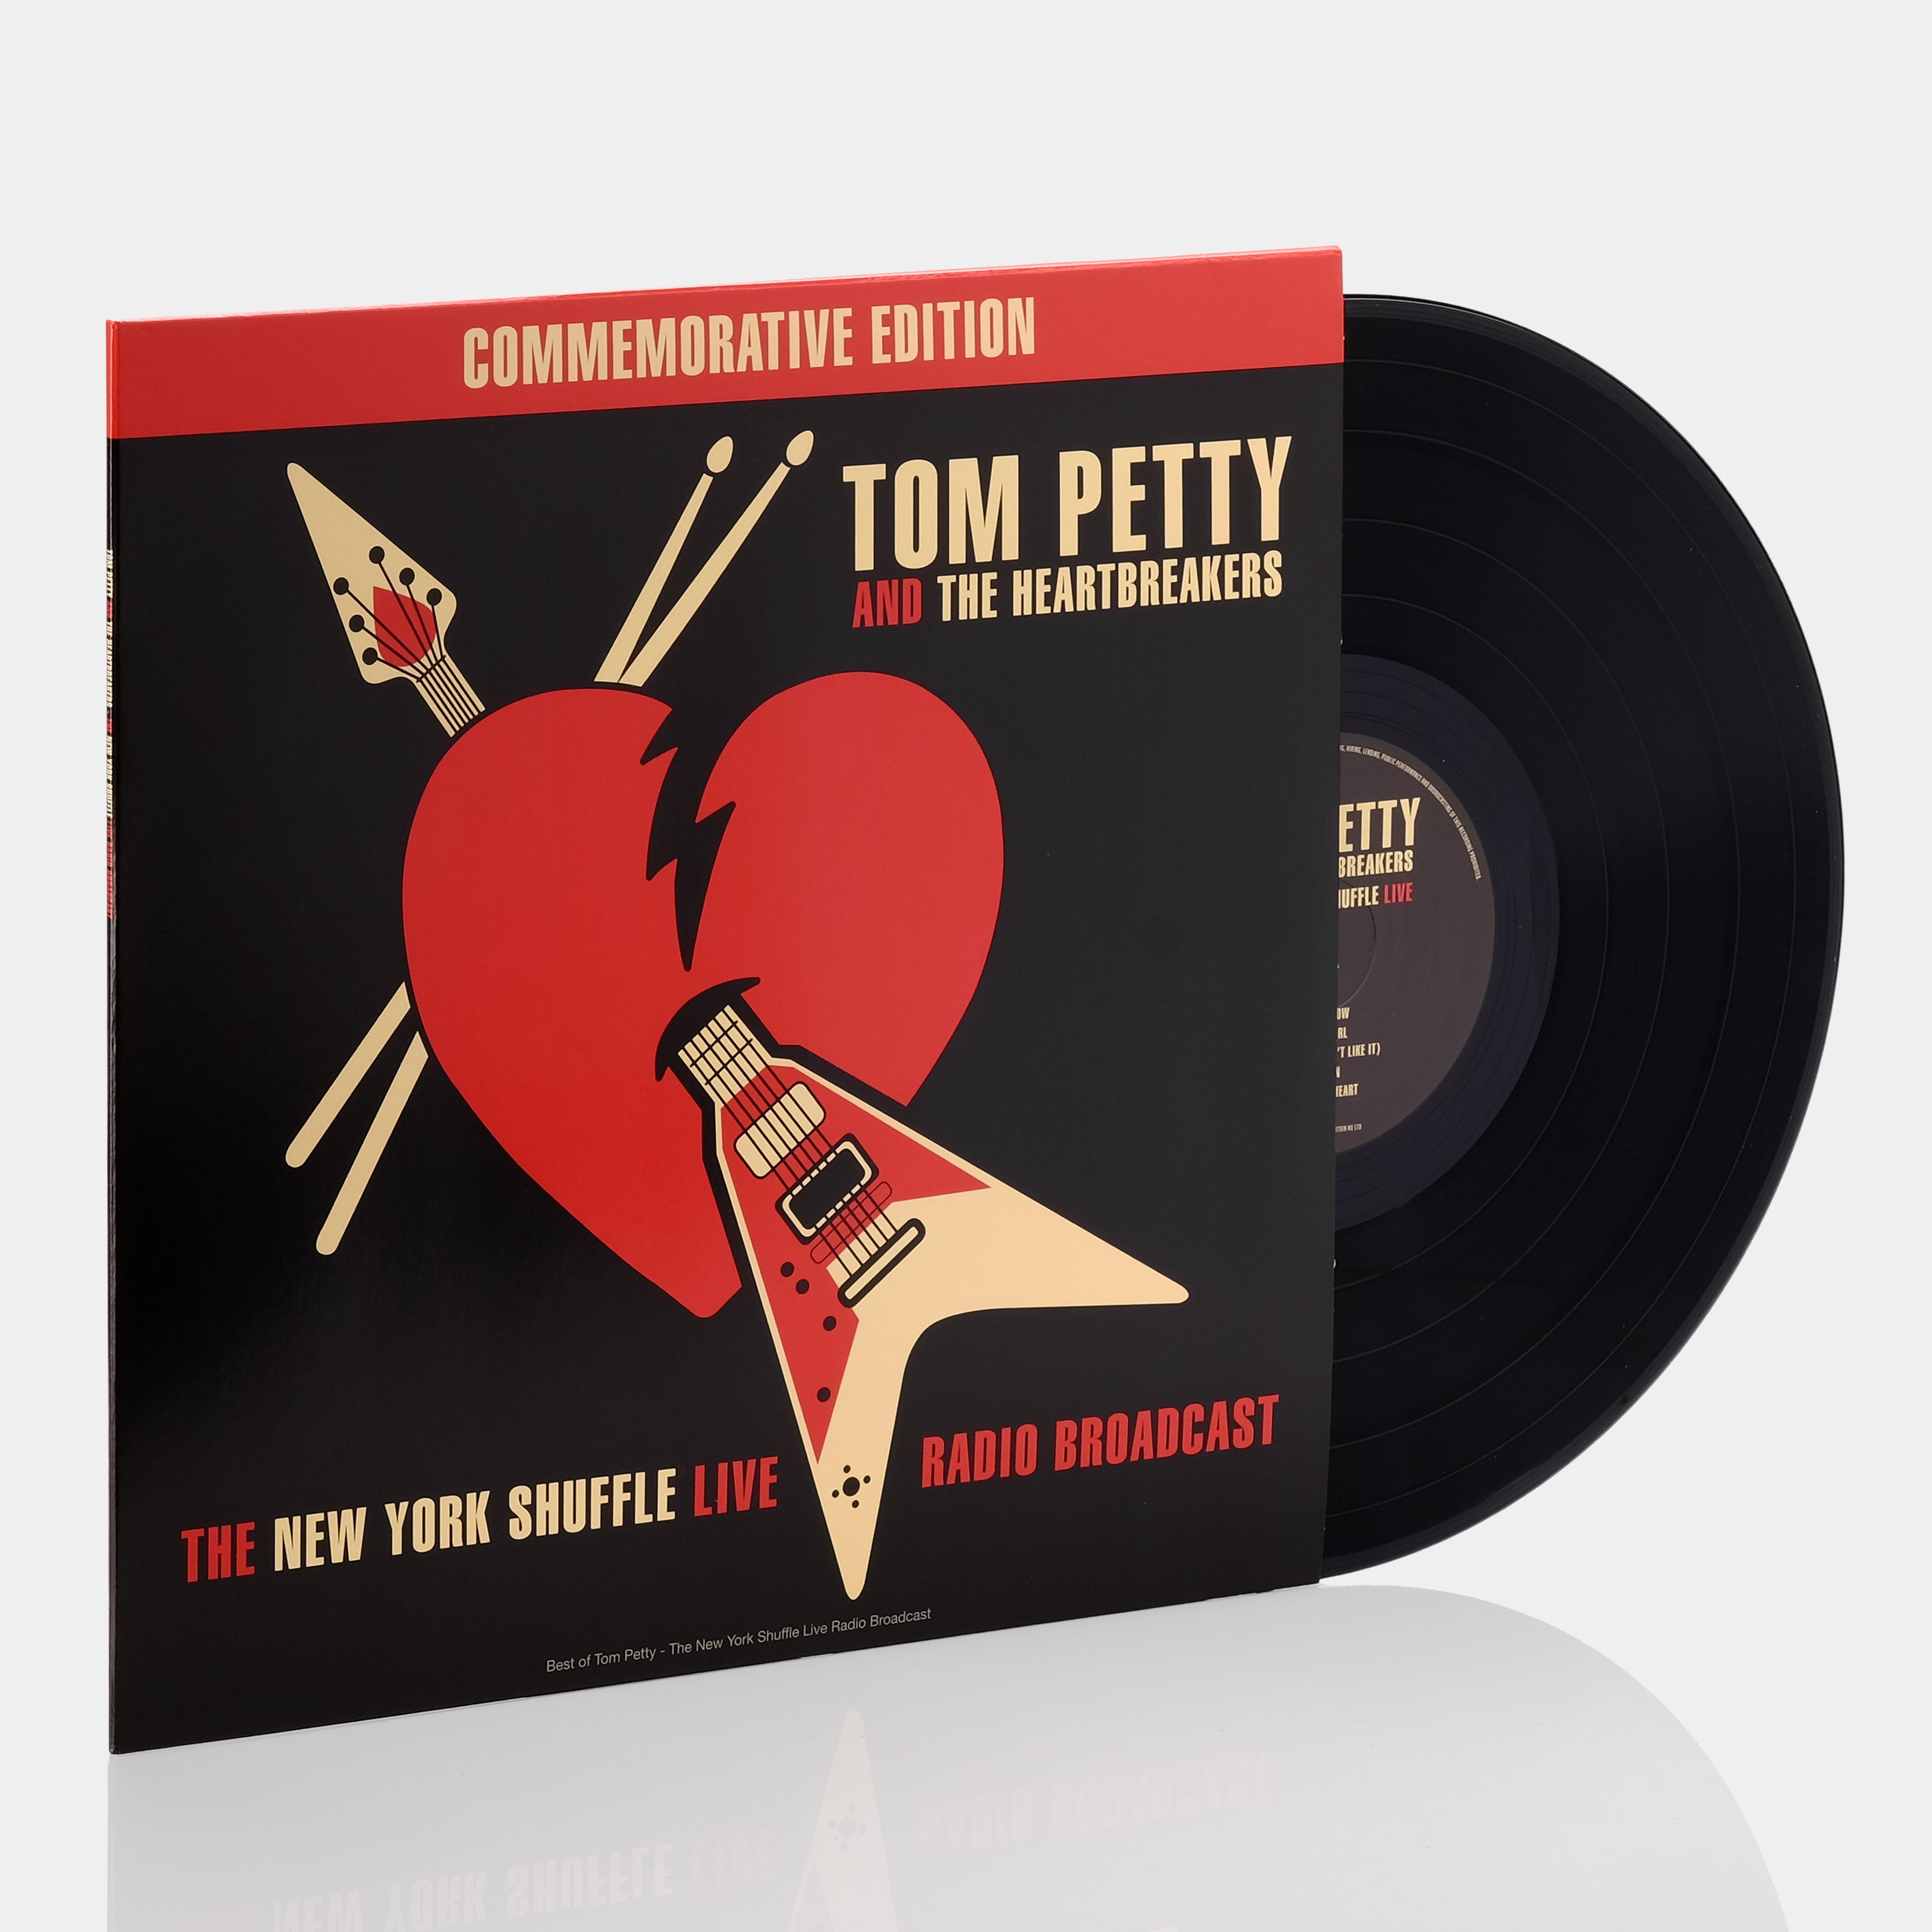 Tom Petty And The Heartbreakers - The New York Shuffle Live Radio Broadcast LP Vinyl Record